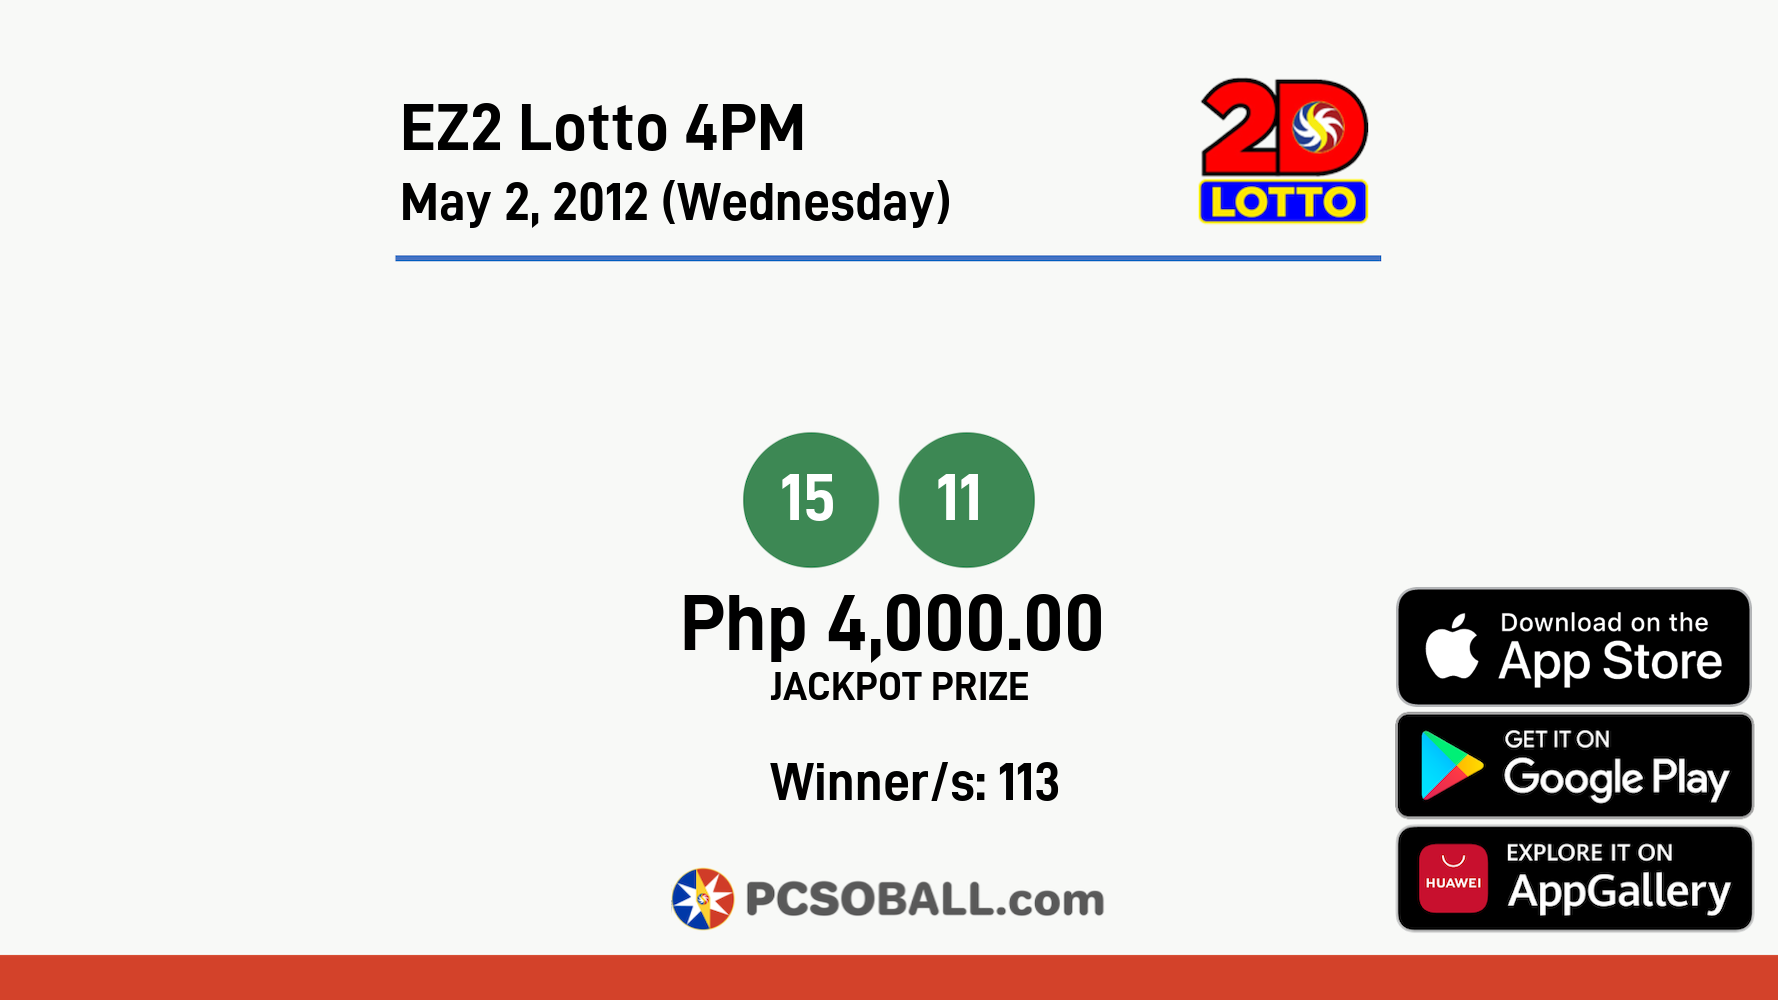 EZ2 Lotto 4PM May 2, 2012 (Wednesday) Result